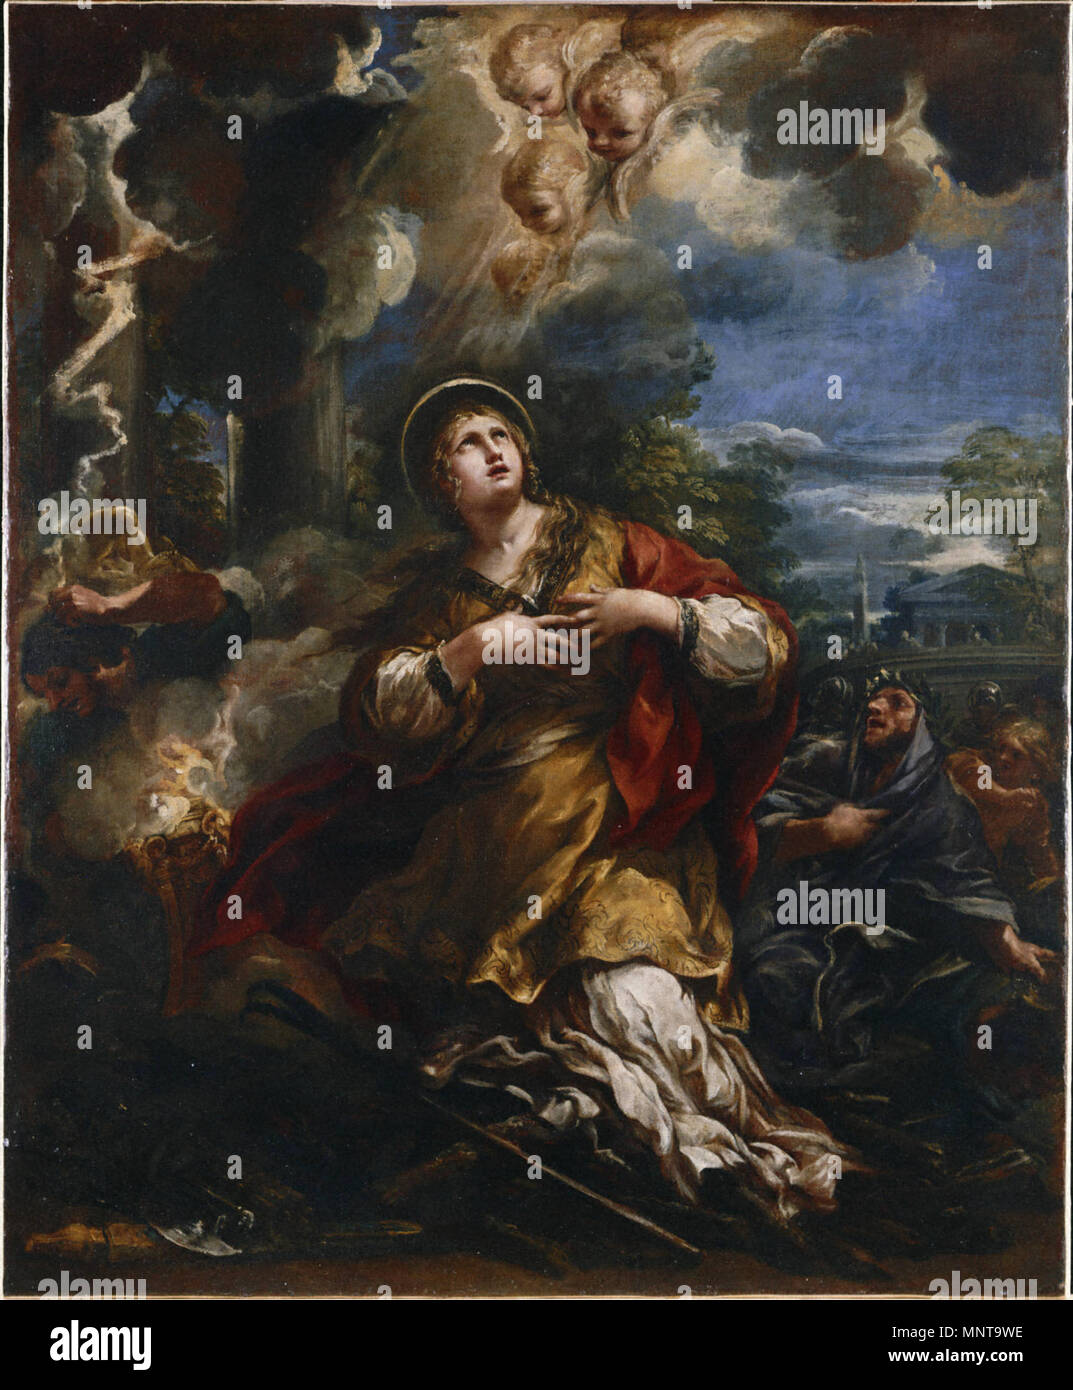 English: Saint Martina Refuses to Adore the Idols .  English: Catalogue Entry: The relics of Saint Martina were found in 1634 beneath the church of Saints Luca and Martina, which Pietro da Cortona renovated during the pontificate of Urban VIII; the painting was most likely in the Barberini Collection and made for Cardinal Francesco Barberini, the pope’s nephew, patron of the Academy and sponsor of the restoration of Saints Luca and Martina. Martina was one of the Roman virgin martyr saints who died for their faith before Christianity became the state religion under Emperor Constantine in a.d. Stock Photo